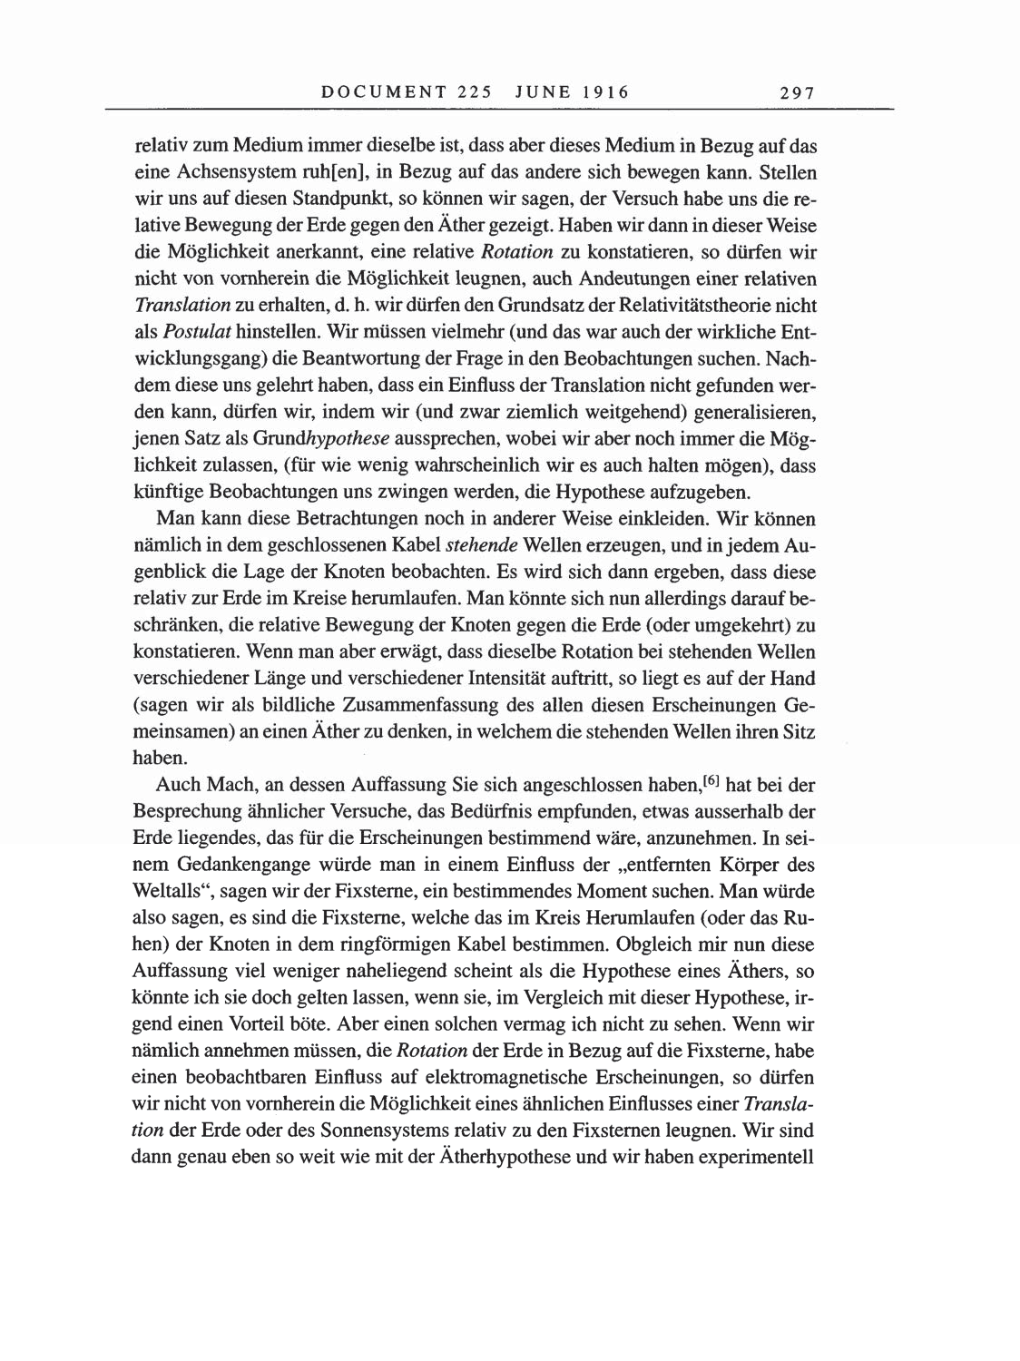 Volume 8, Part A: The Berlin Years: Correspondence 1914-1917 page 297